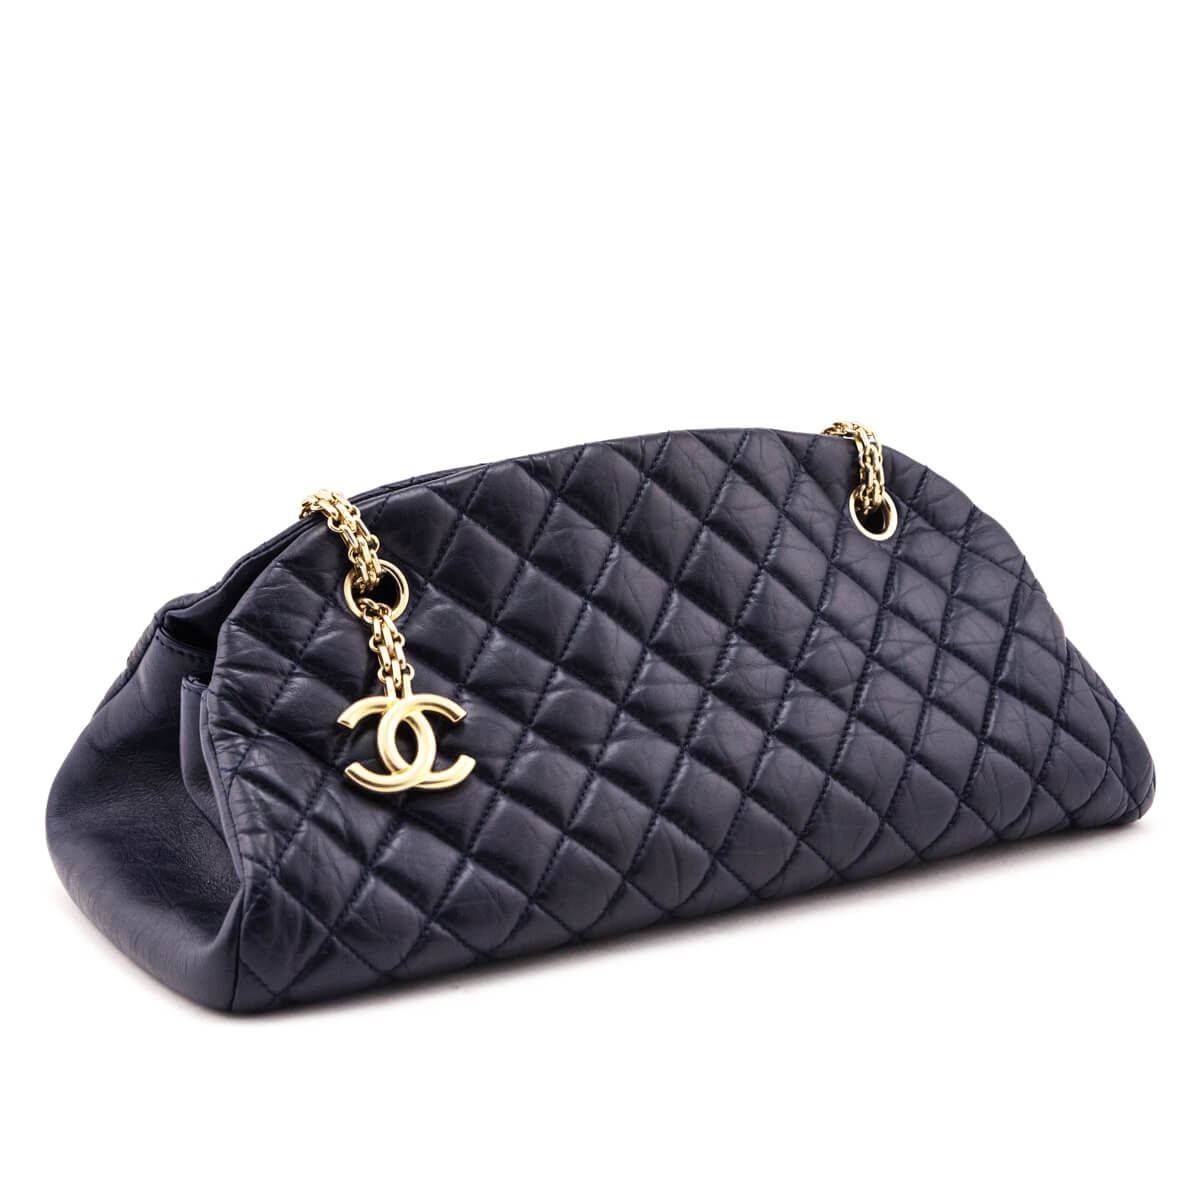 Authentic CHANEL Quilted Caviar Grand Shopper Tote in SHW, Luxury